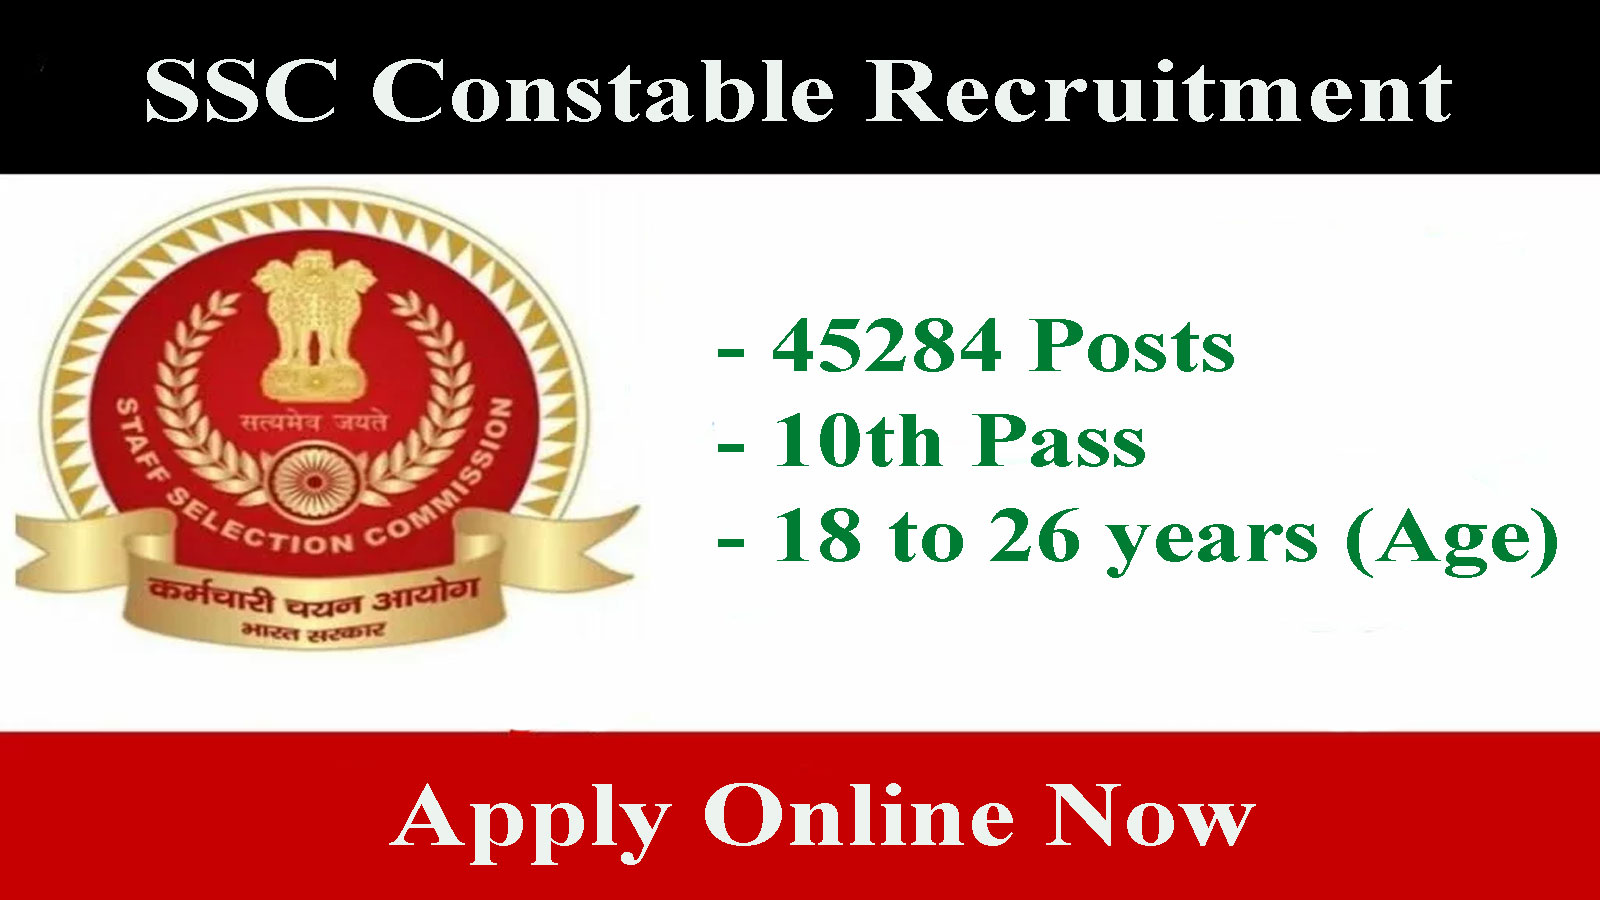 45284 Posts | SSC Constable Recruitment 2022, Registration ends on Nov 30 | Qualification: 10th